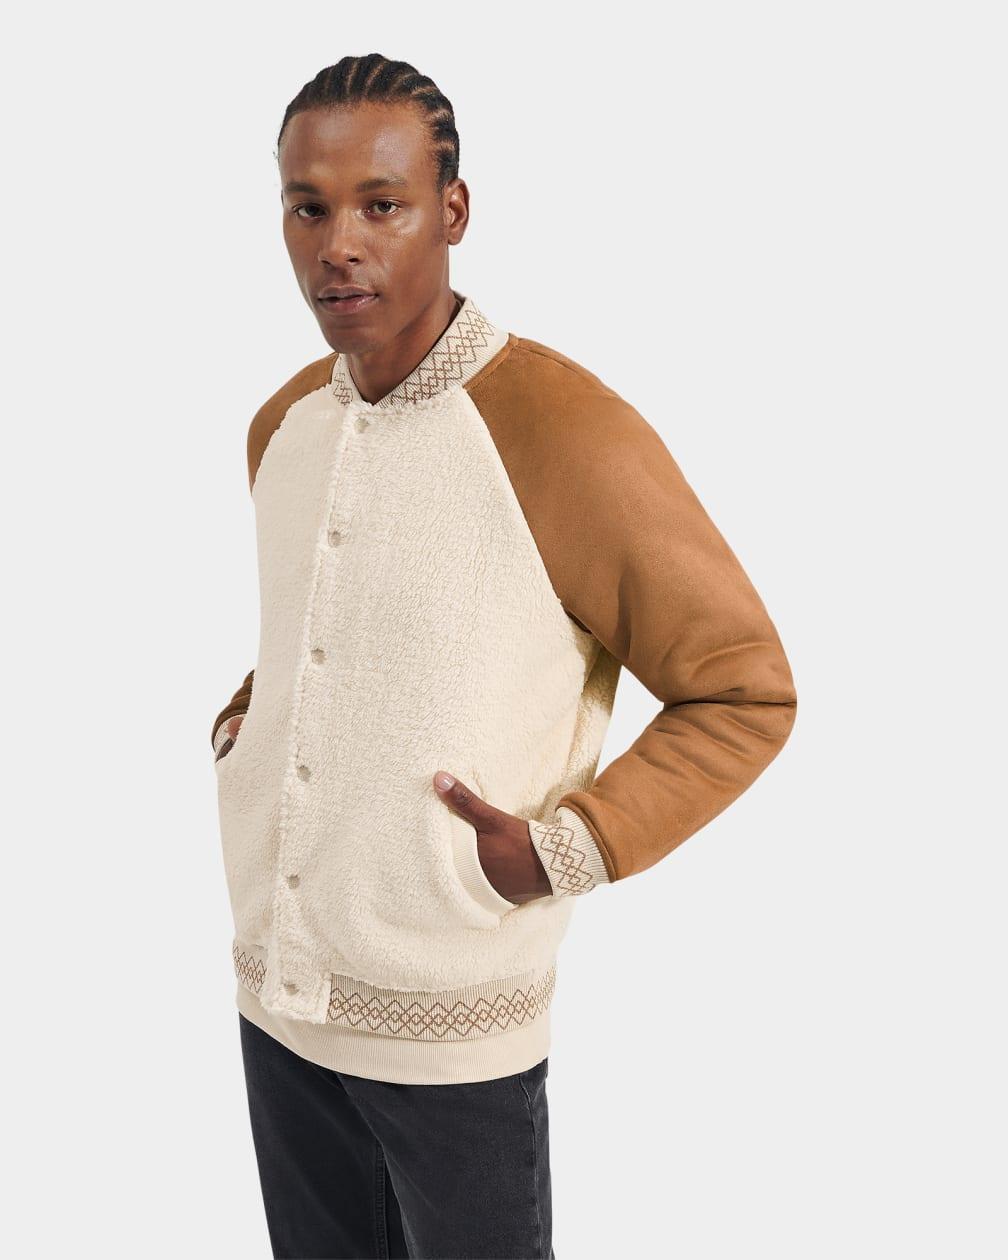 UGG Tasman Varsity Jacket Tasman Varsity Jacket in Natural | Lyst